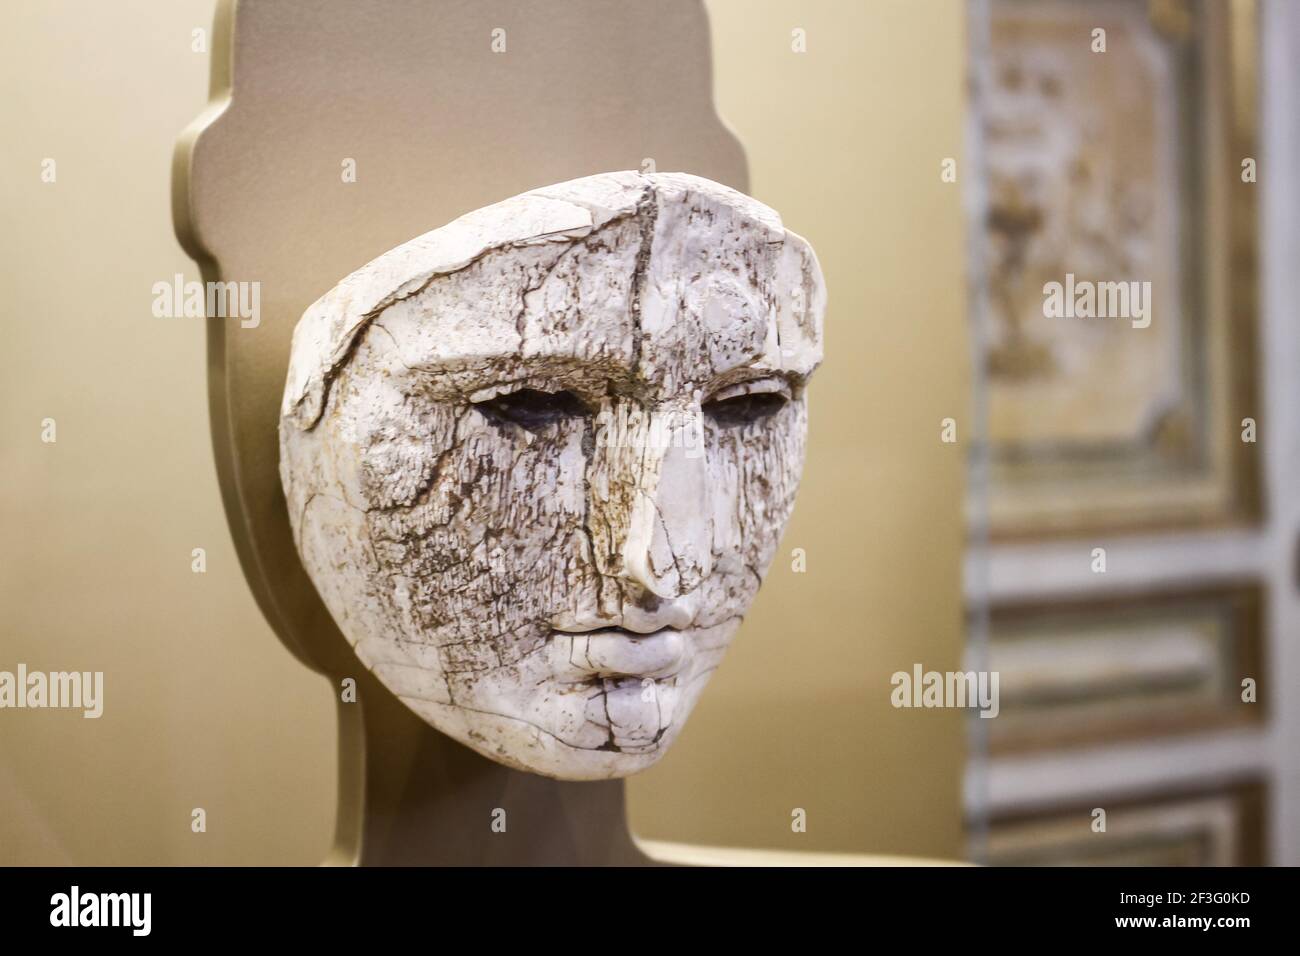 Vatican City, Vatican. February 3, 2016. Etruscan sculpture of a human mask in stone. Concept art. Stock Photo